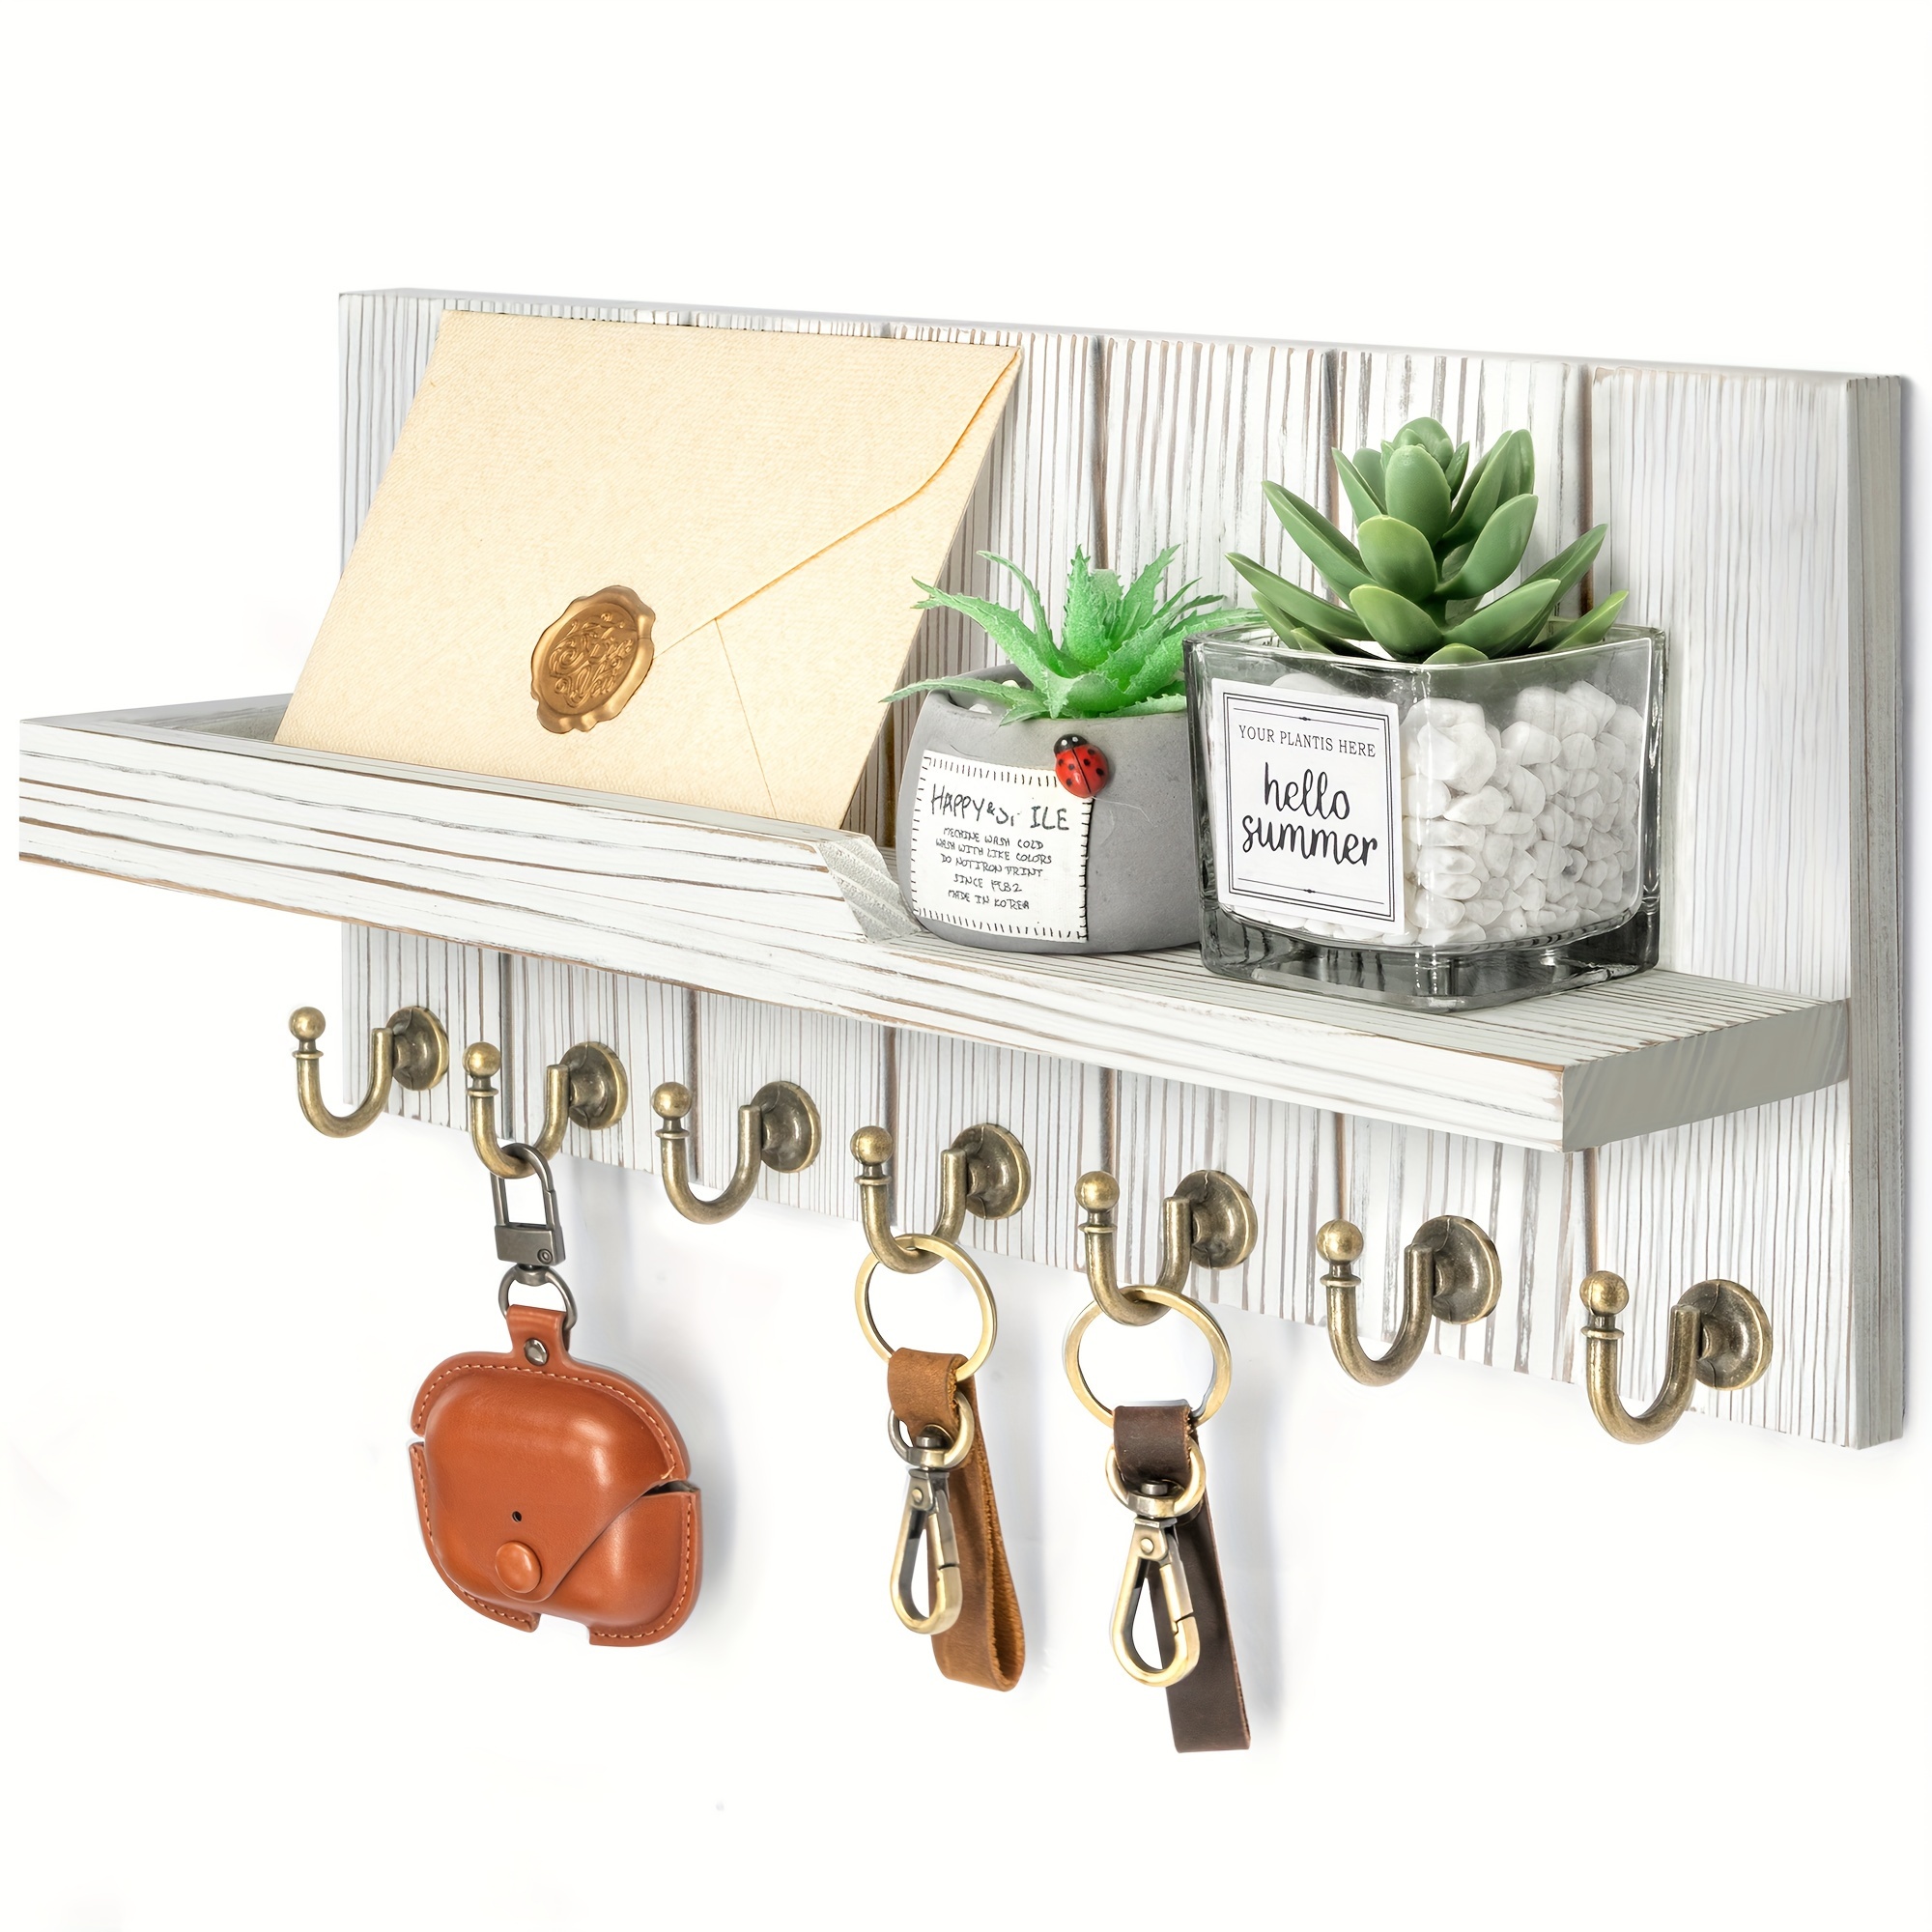 

Farmhouse Key And Mail Holder For Wall - Decorative Mail Organizer Wall Mount With 7 Hooks And Mounting Hardware - Elegant White Key Hanger For Entryway And Home Wall Decor